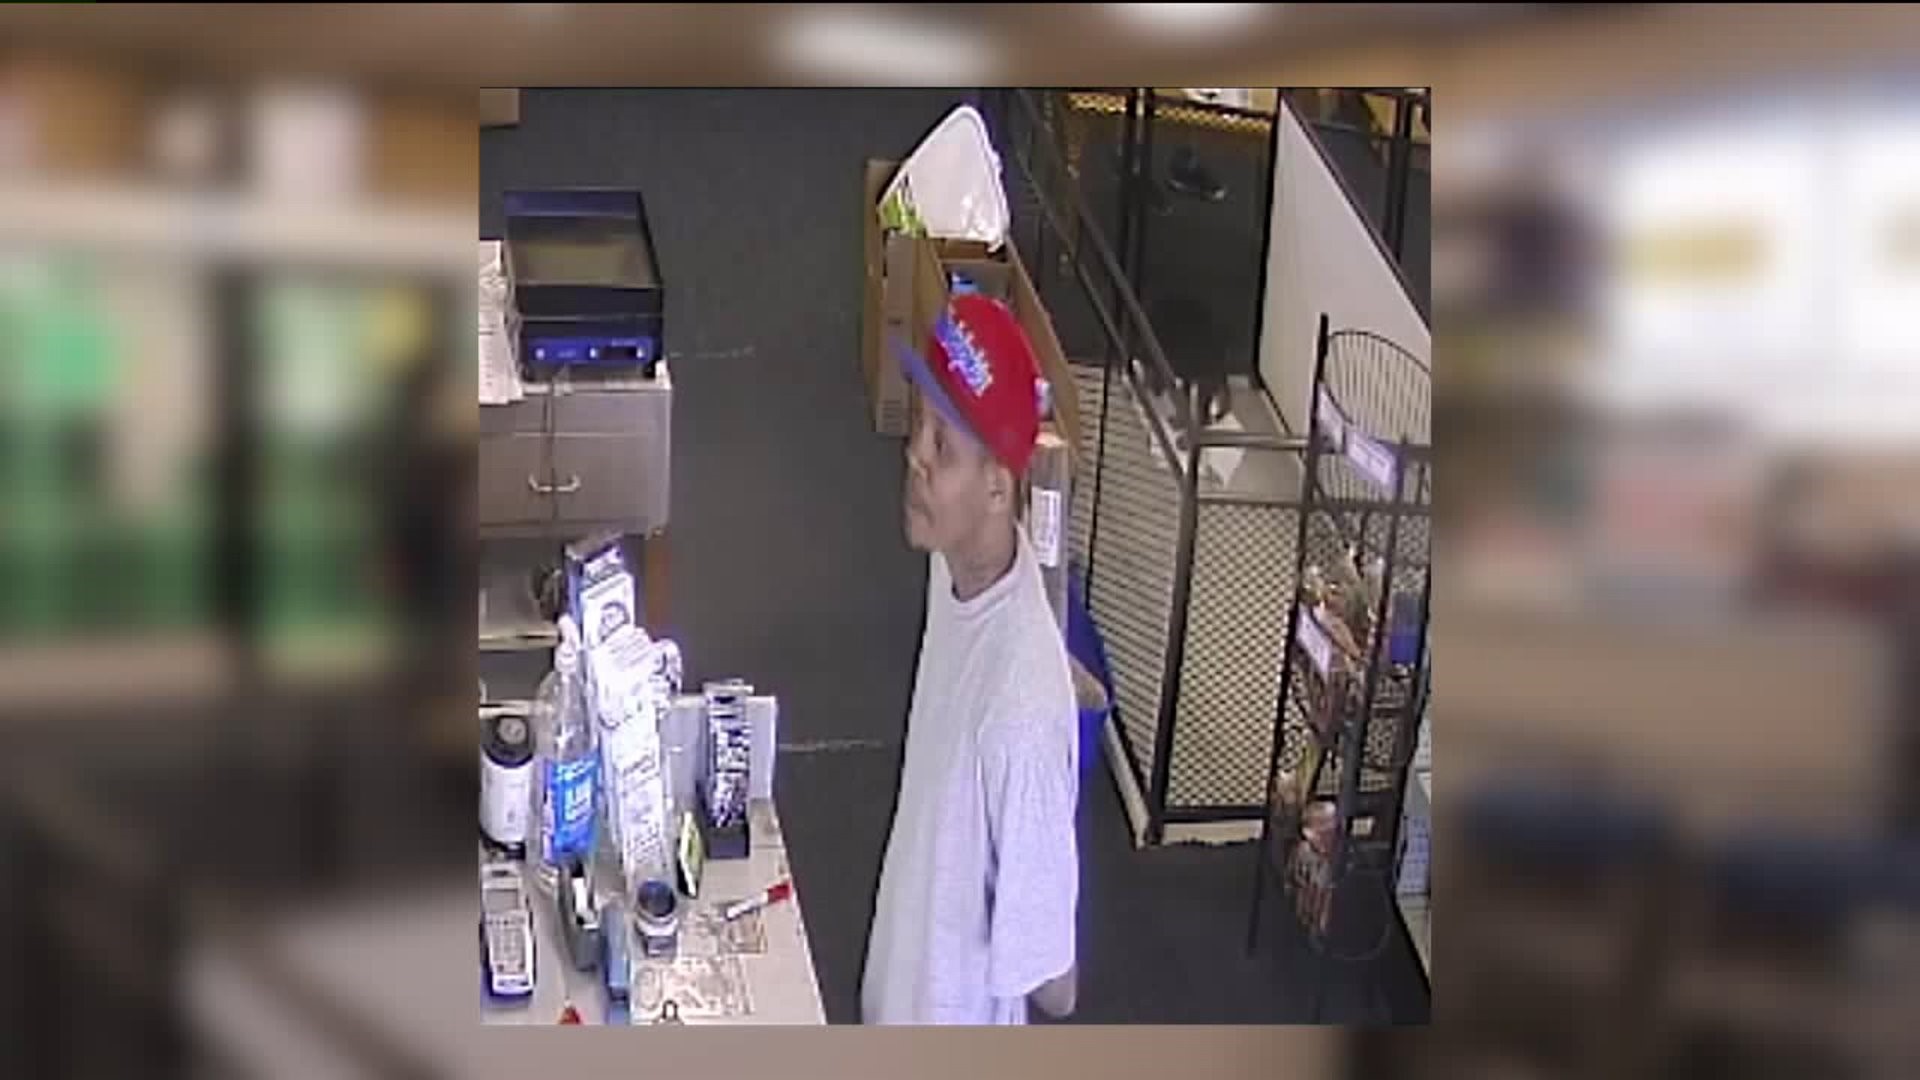 Armed Robber Steals Puppy from Pet Shop